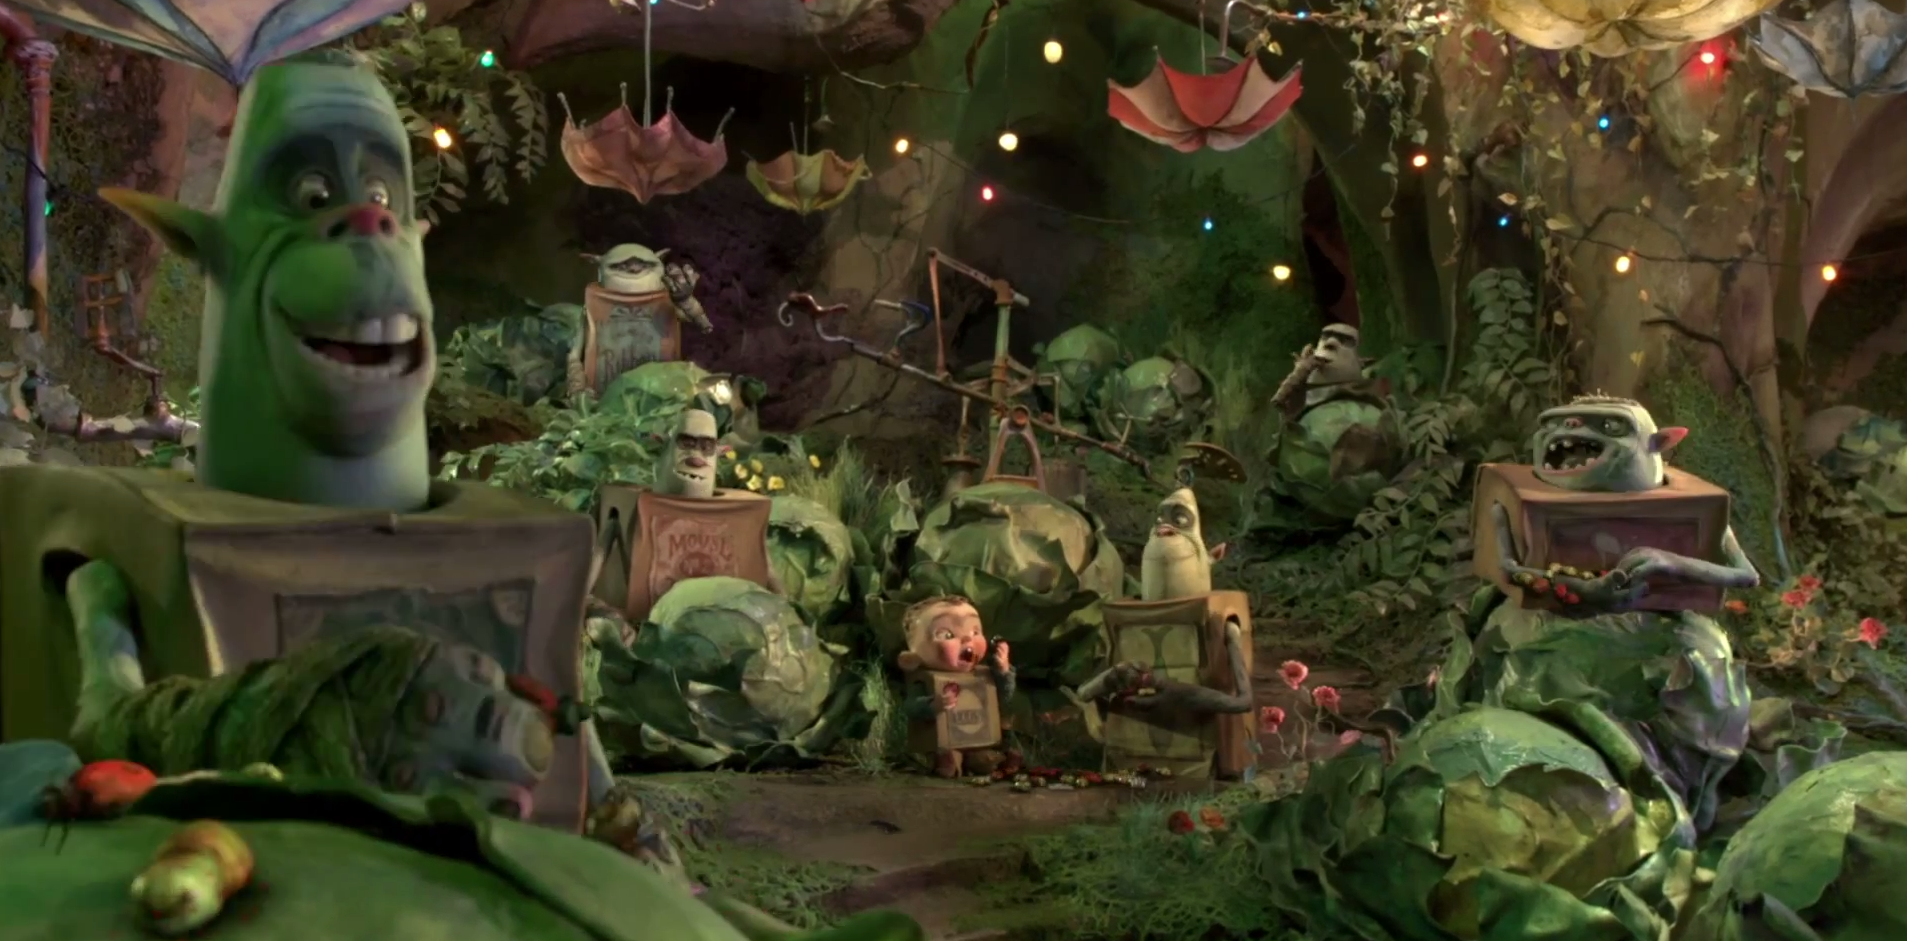 A Poem & Lots of Action in 'The Boxtrolls' Trailer #3 - Rotoscopers